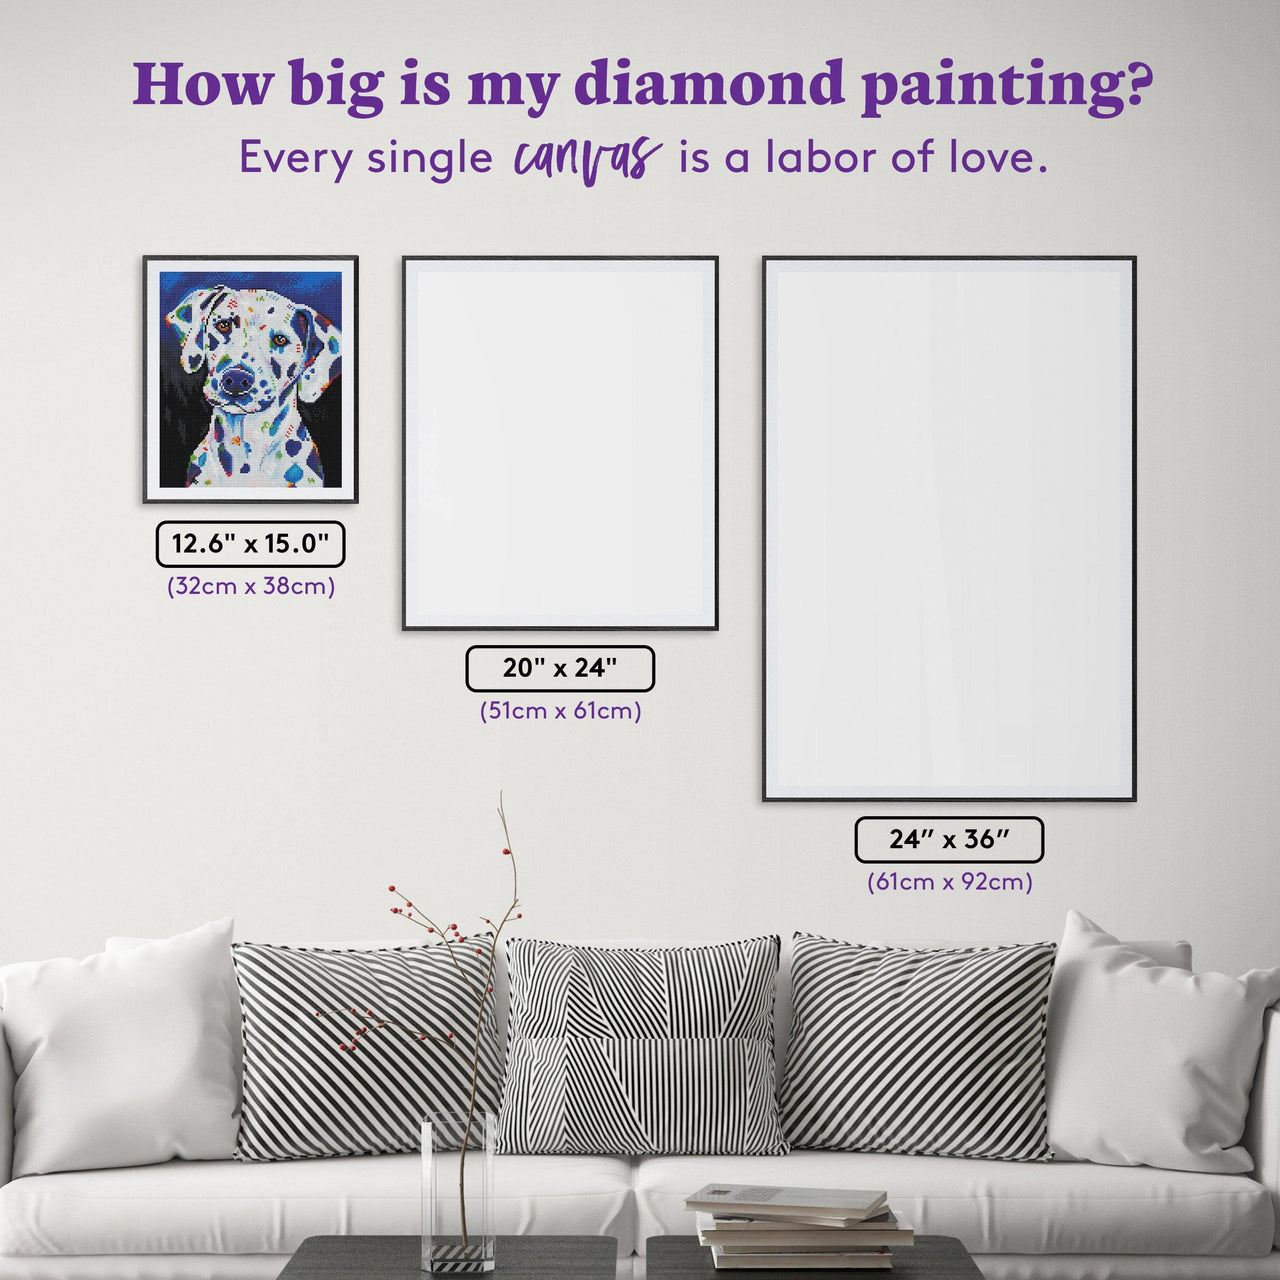 Diamond Painting Spot 12.6" x 15.0" (32cm x 38cm) / Round With 26 Colors including 1 AB / 15,143